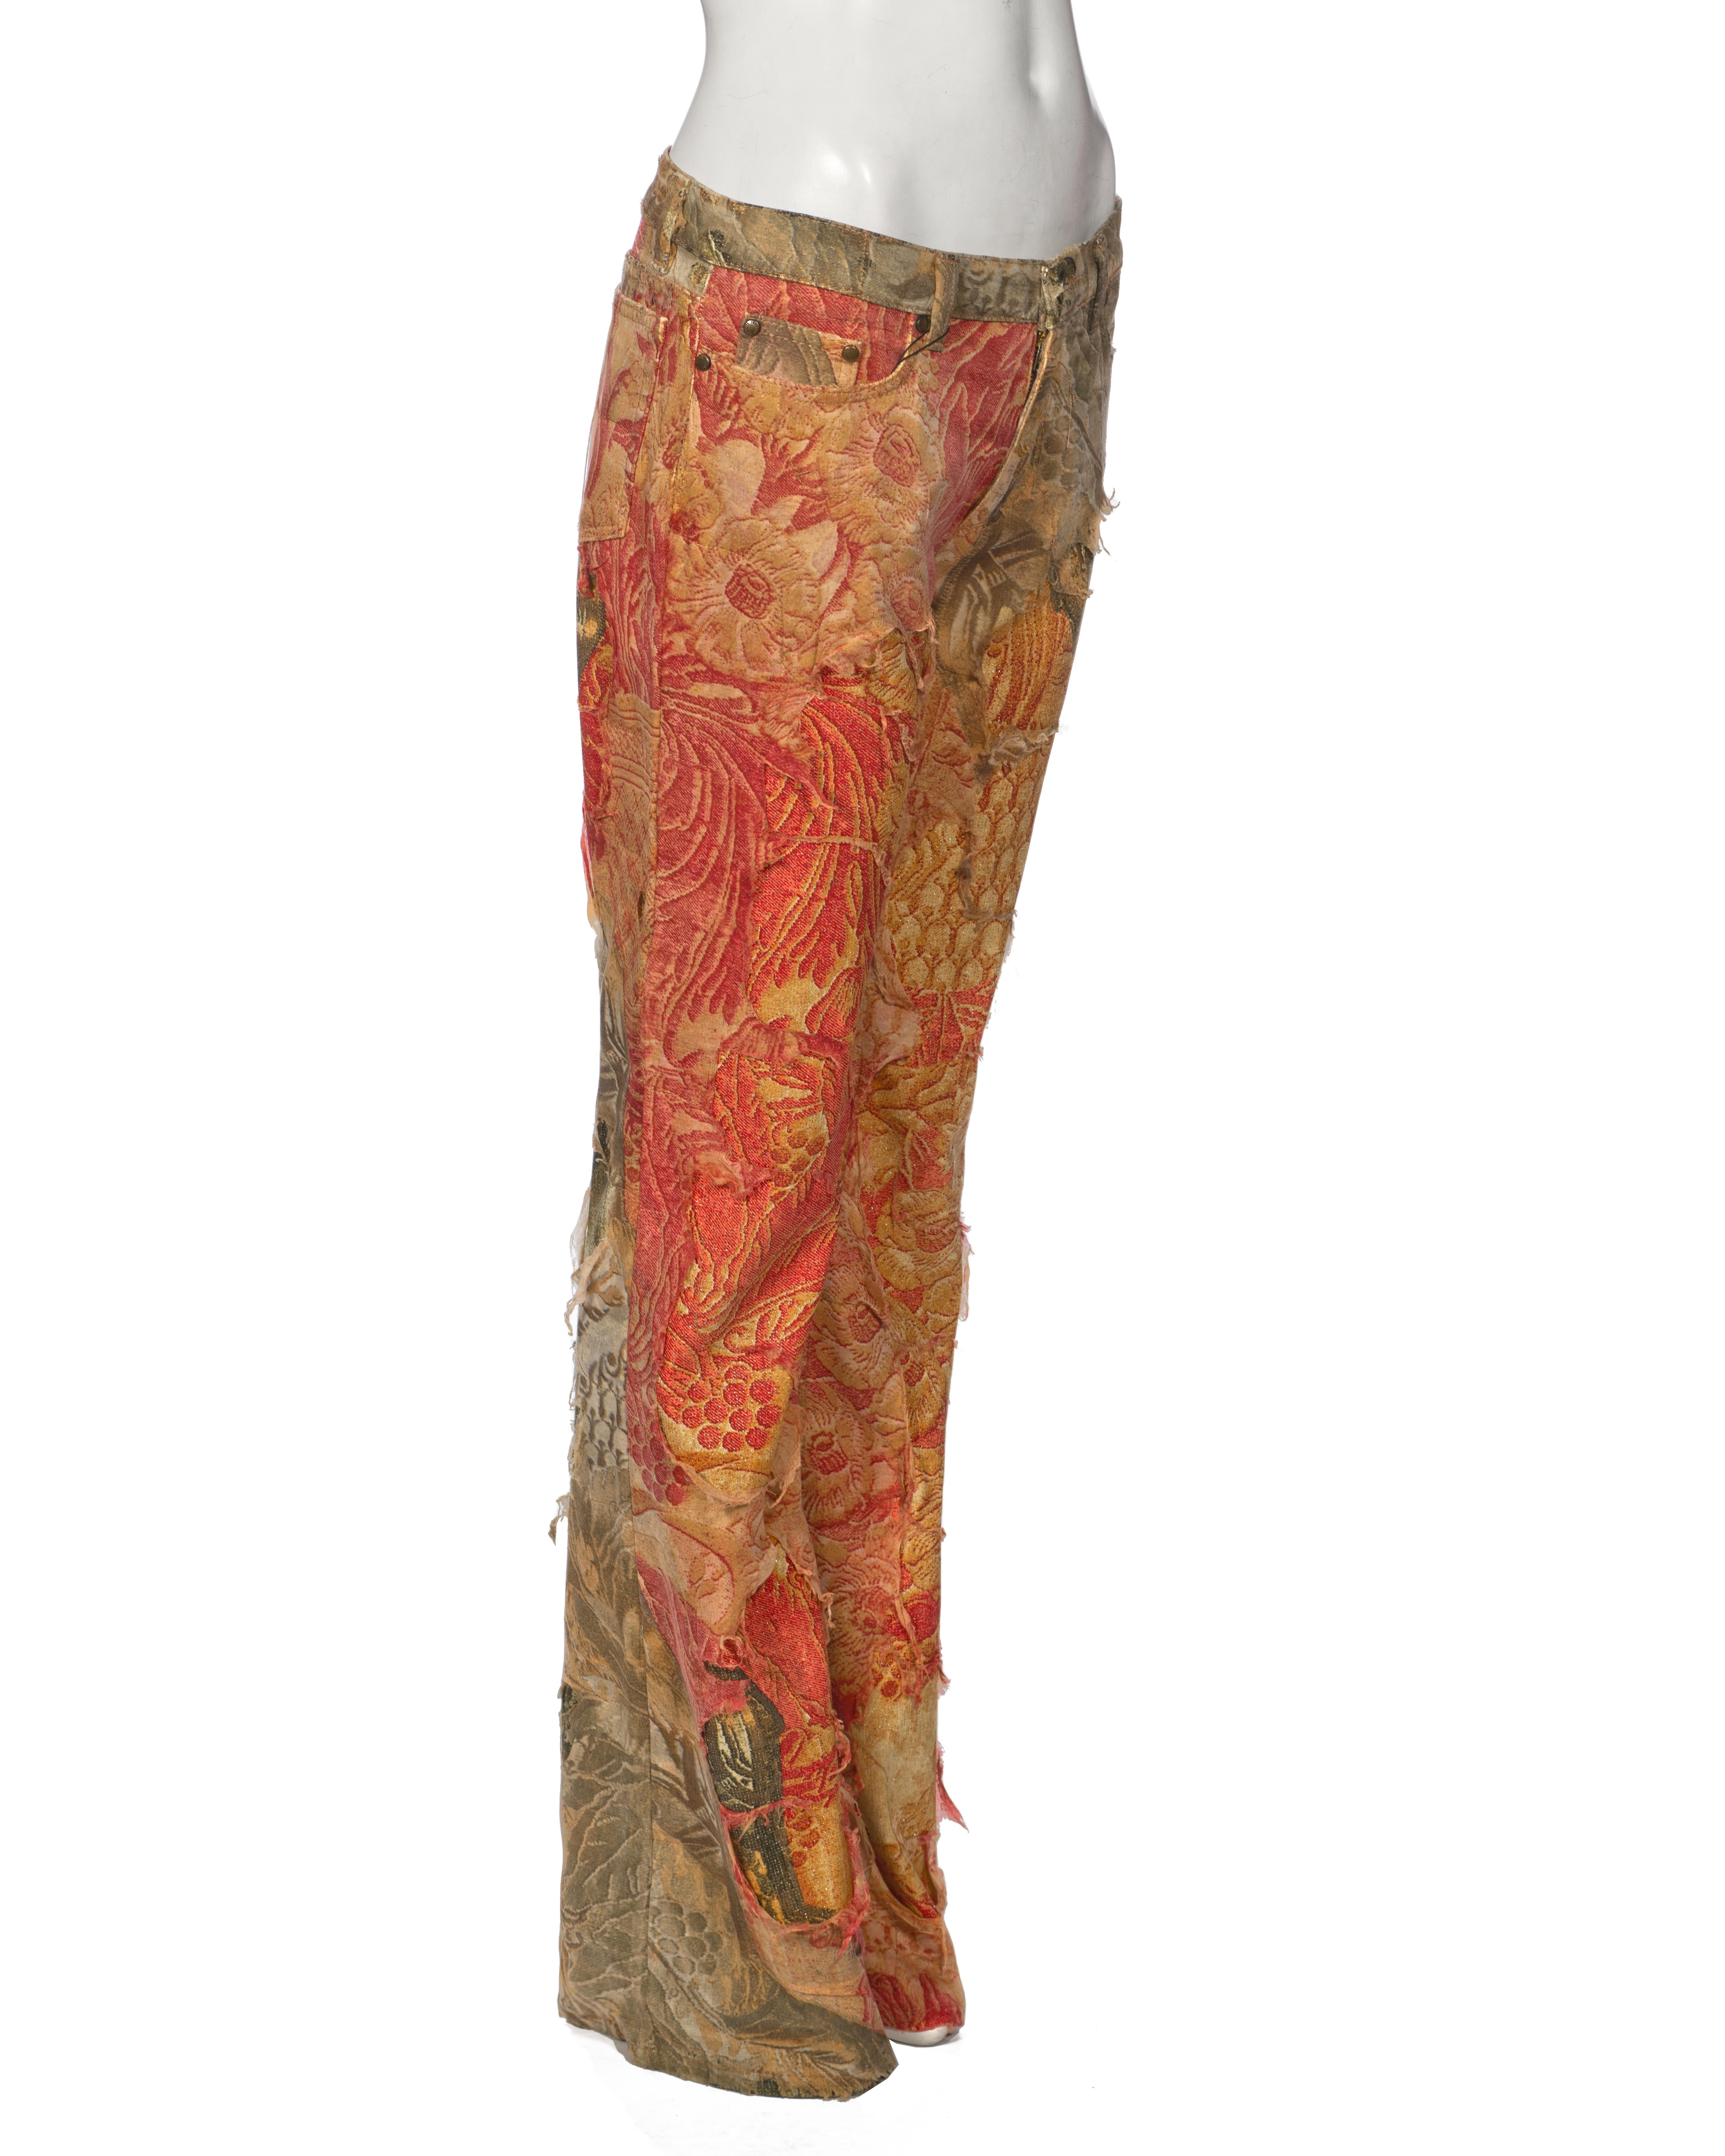 Roberto Cavalli Baroque Cotton Pants With Distressed Silk Overlay, fw 2001 For Sale 1